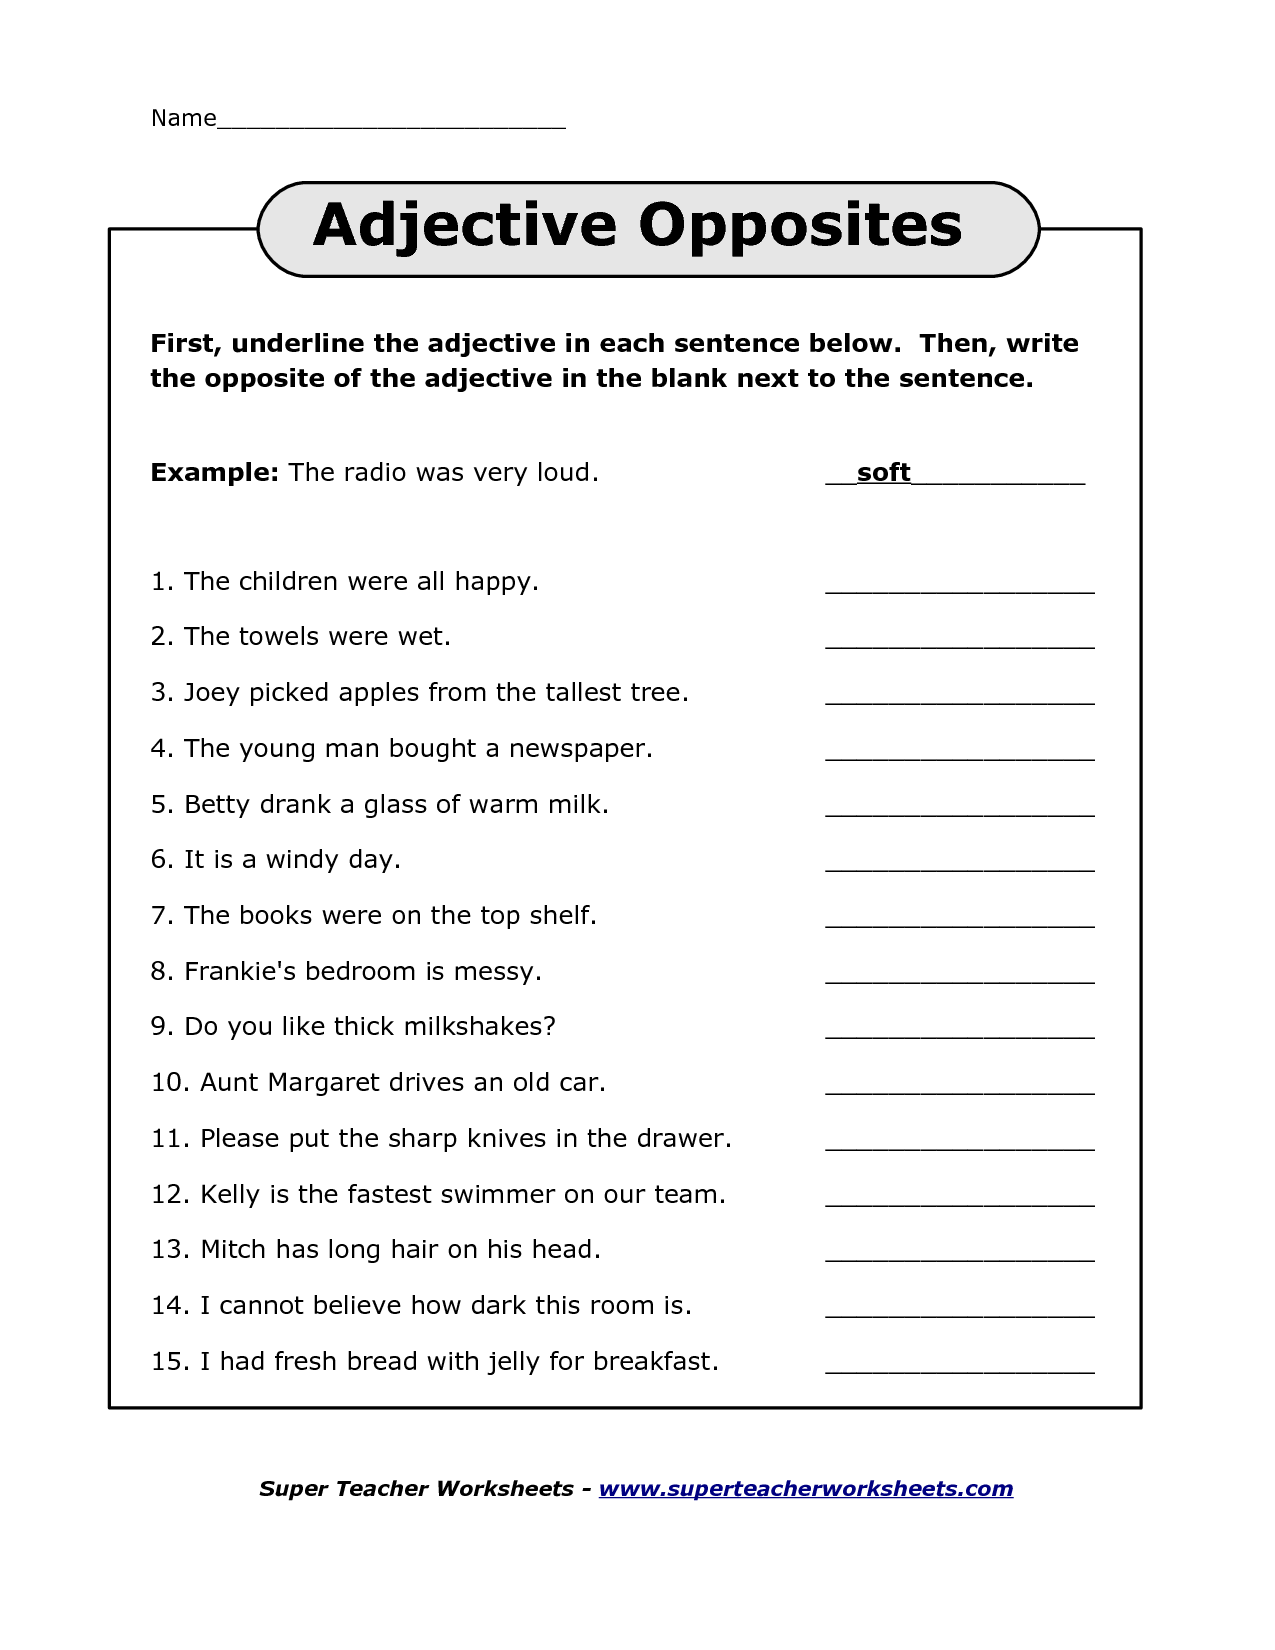 5-best-images-of-loud-and-soft-worksheet-near-and-far-worksheets-preschool-adjective